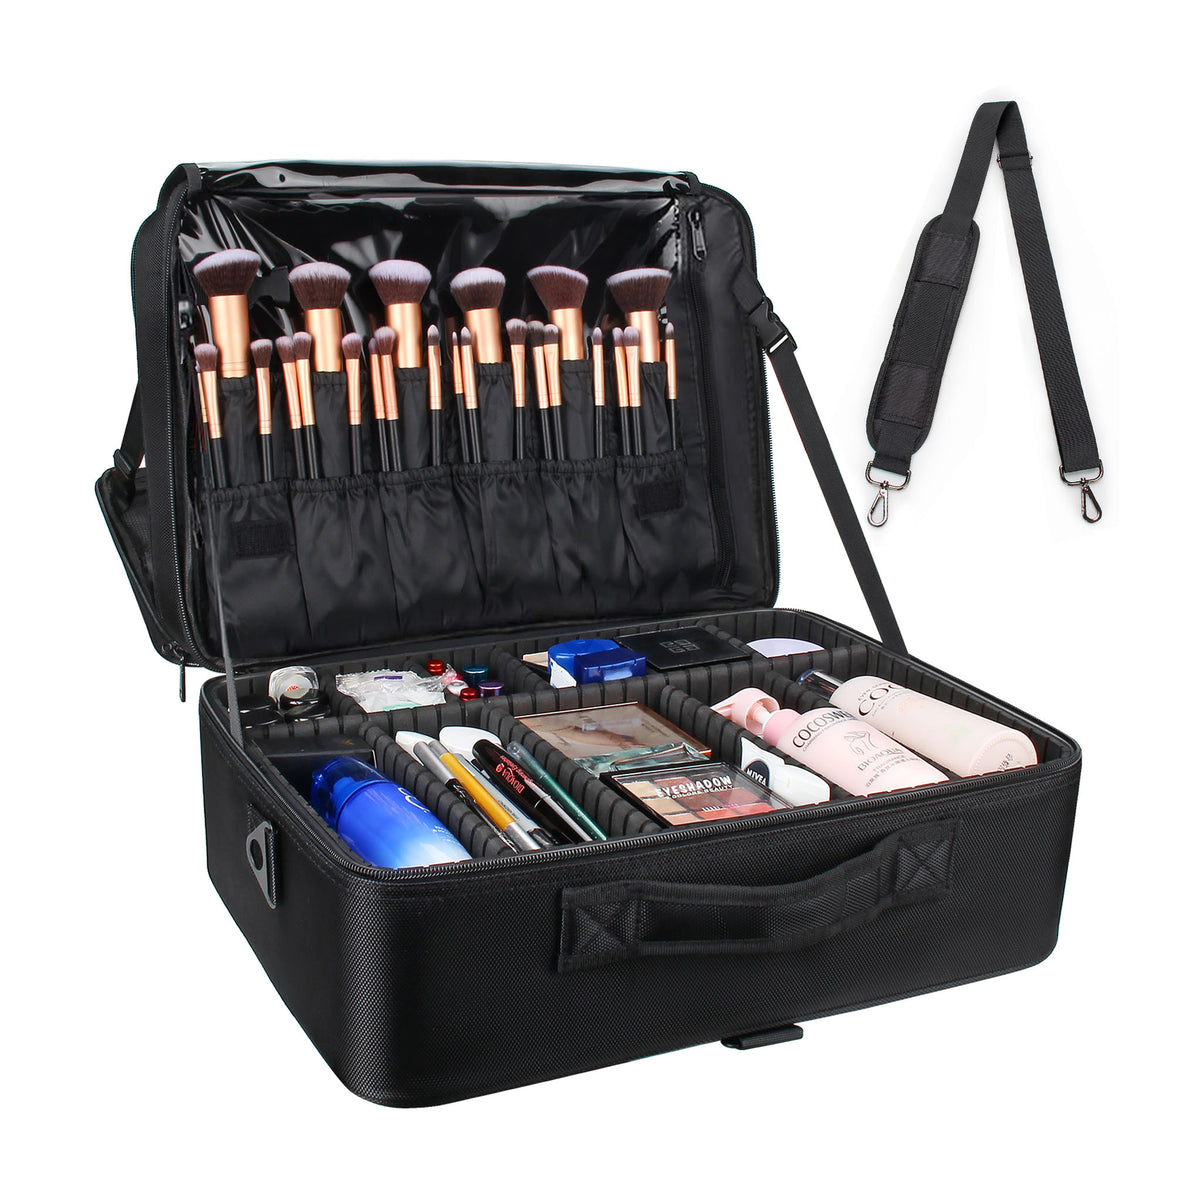 Relavel Extra Large Makeup Bag, Makeup Case Professional Makeup Artist Kit  Train Case Travel Cosmetic Bag Brush Organizer, Waterproof Leather  Material, with Adjustable Shoulder Straps and Dividers Black Extra Large